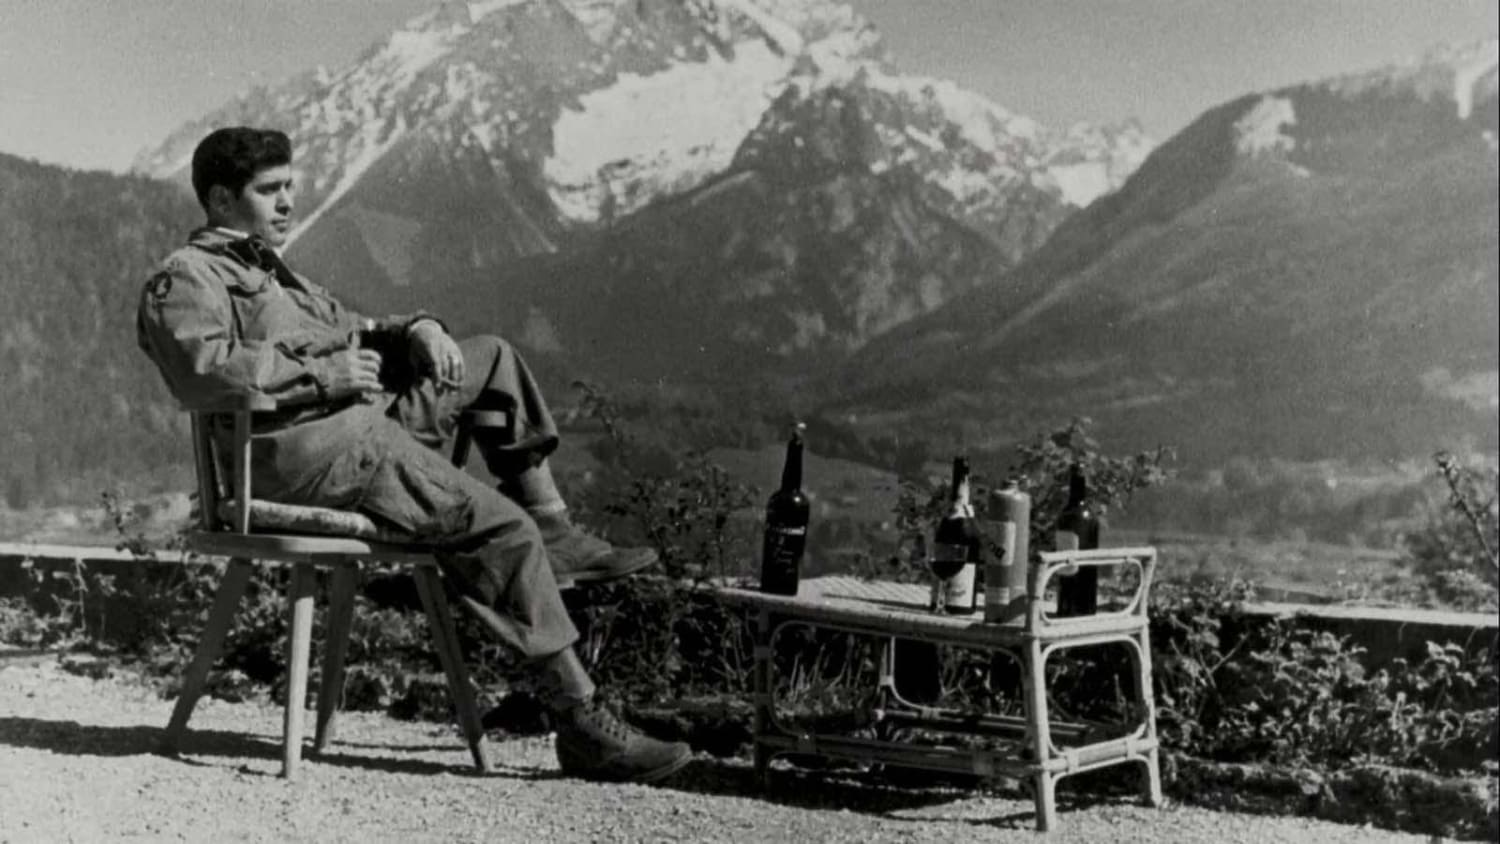 A paratrooper of the 101st Airborne Division enjoying the view and a cognac while lounging on the terrace of Hitler’s retreat at Berchtesgaden after the end of the war. Taken in May 1945